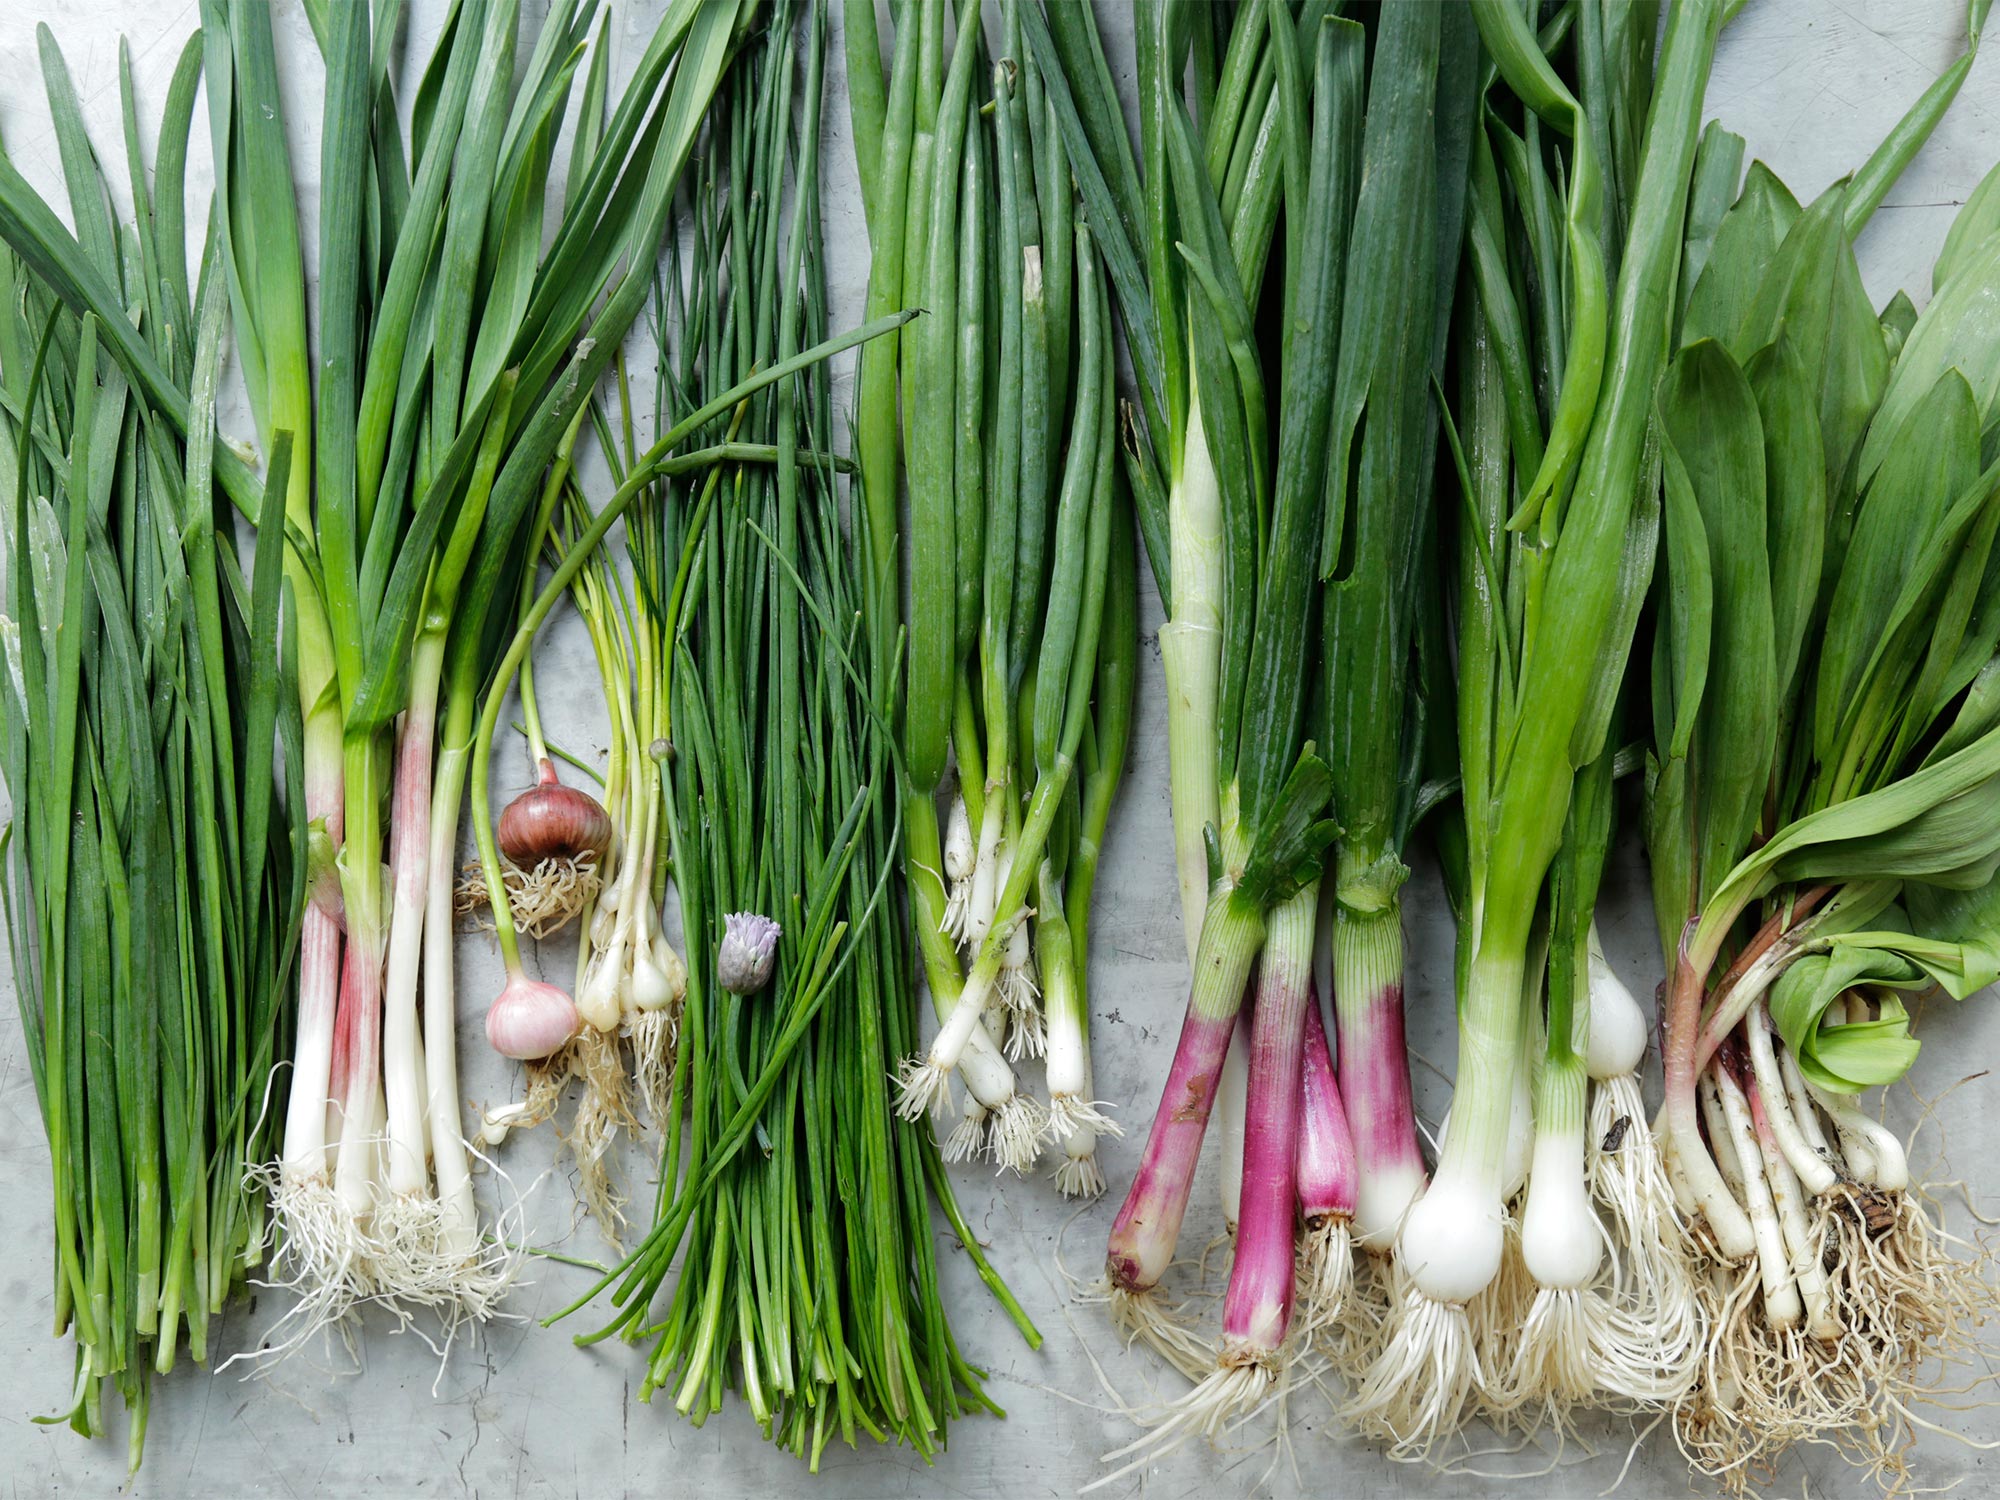 The difference between shallots, green onions, scallions and spring onions